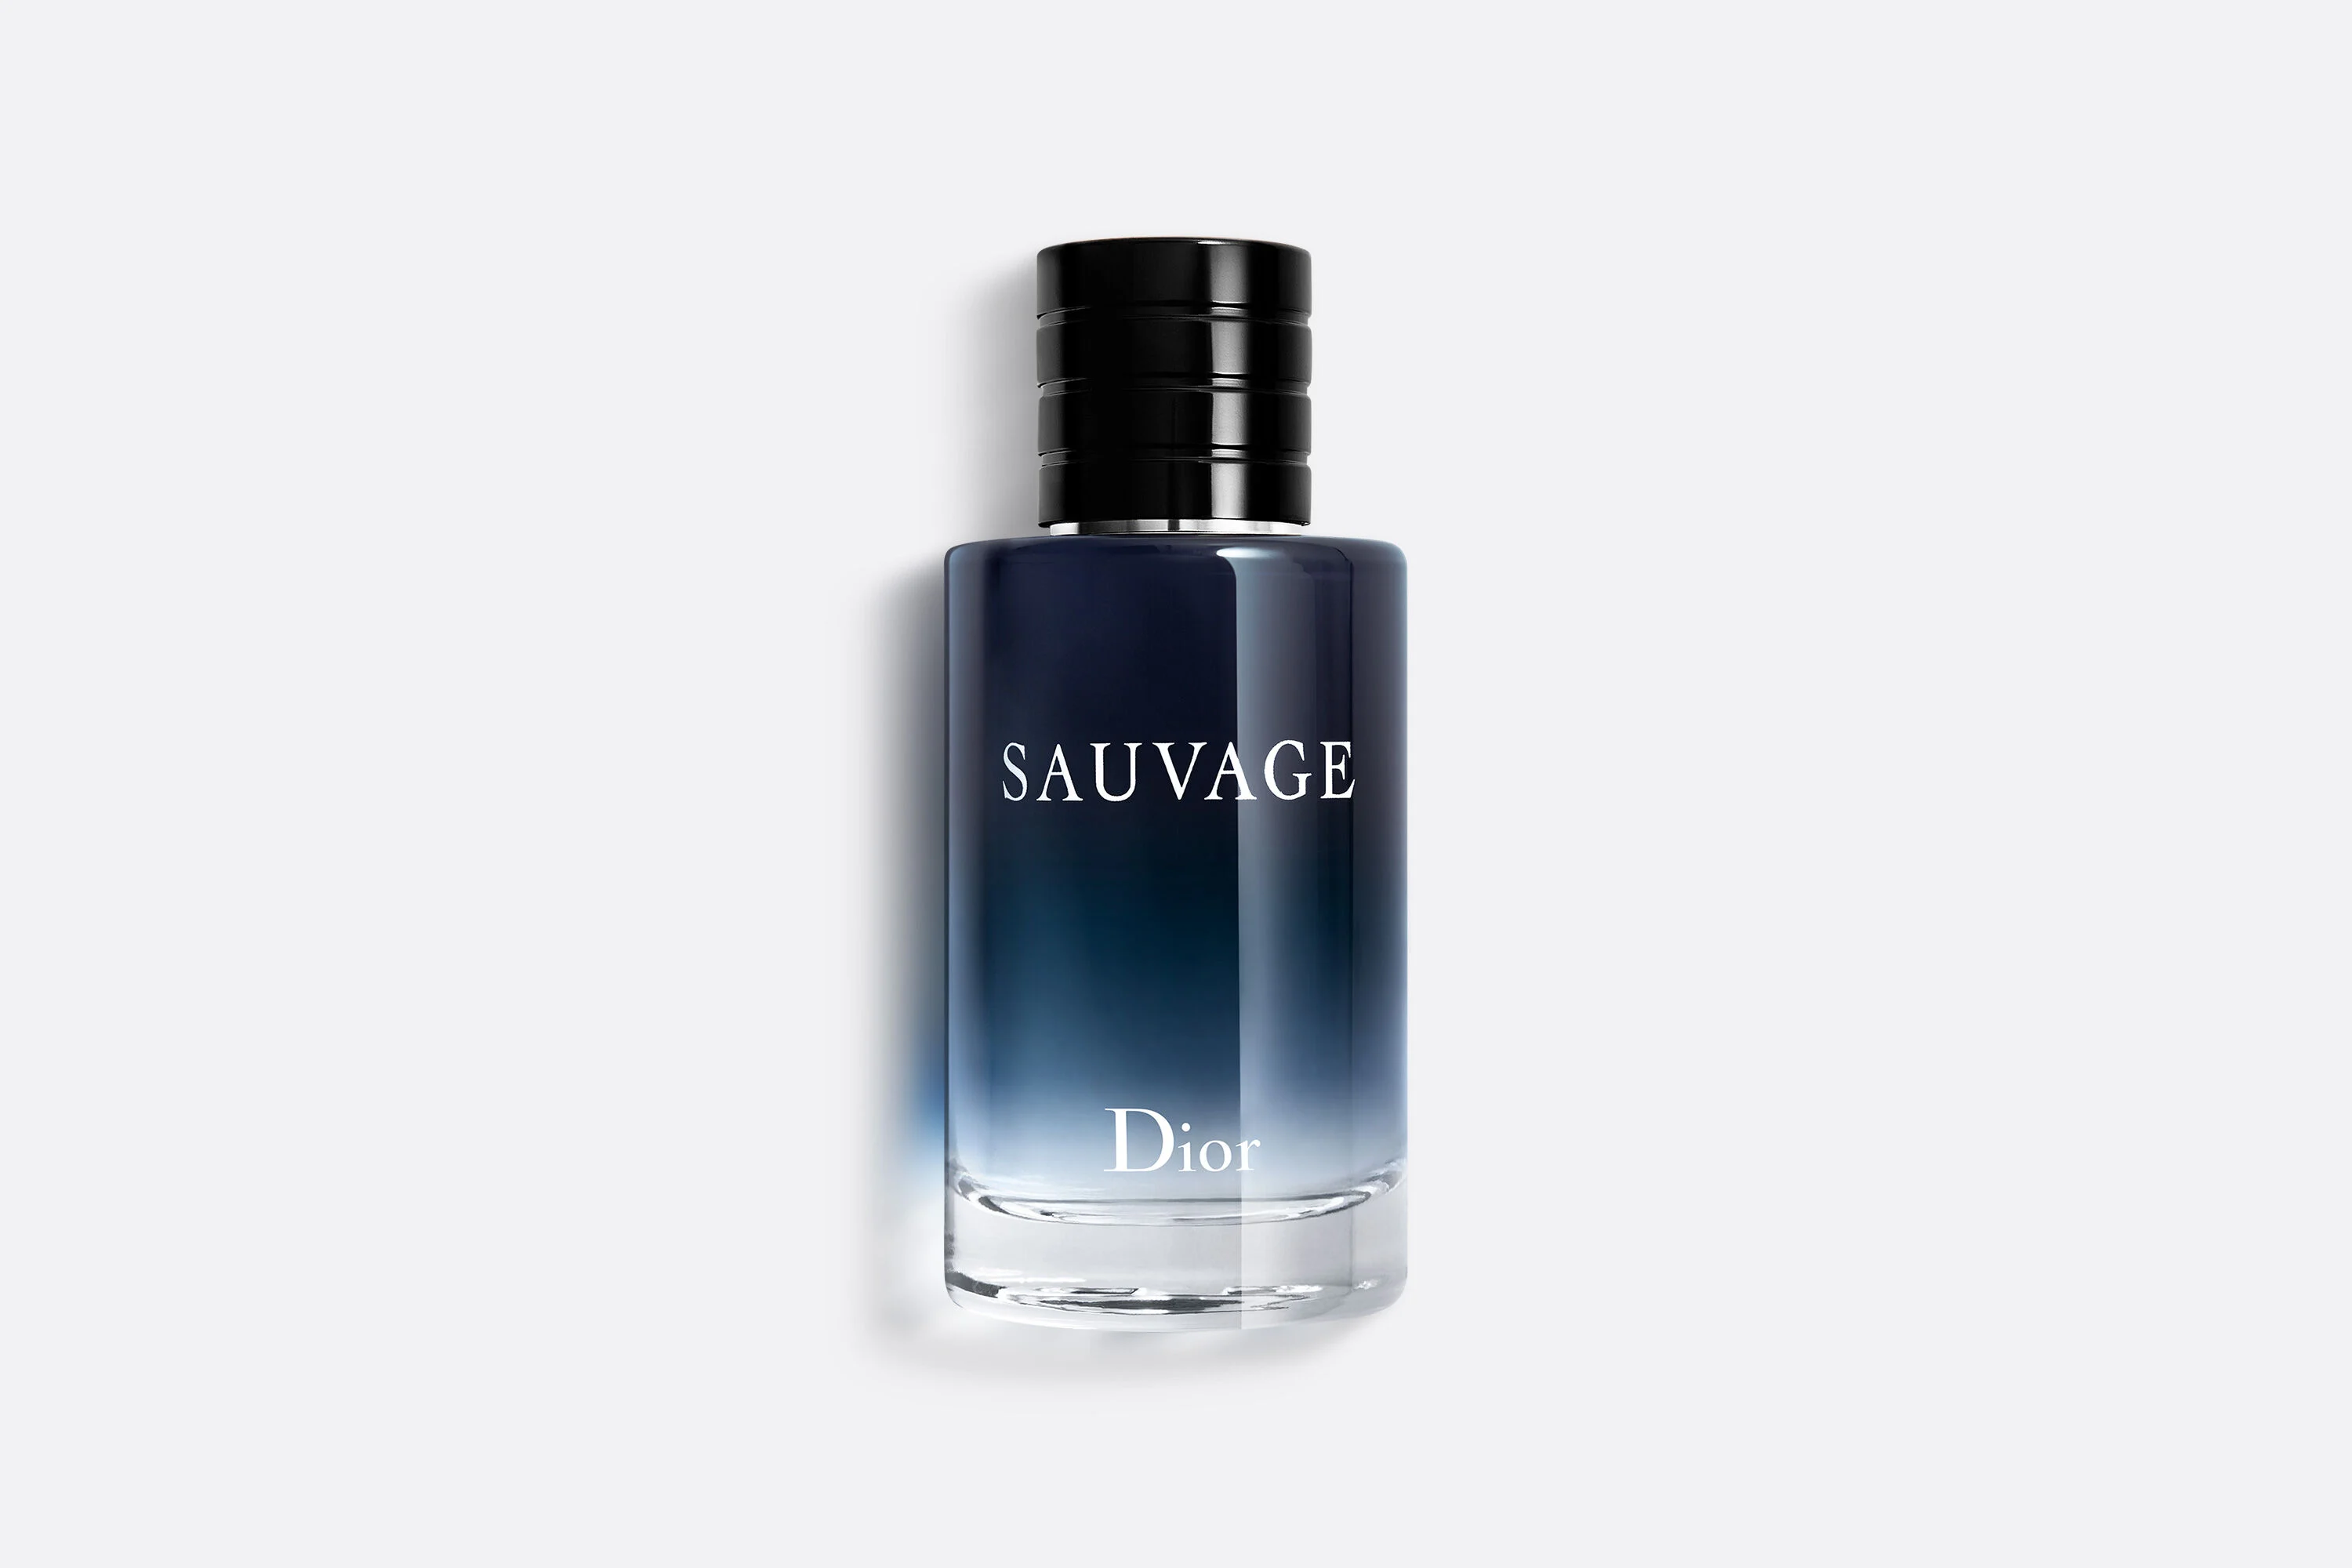 Sauvage EDT bottle is shown in the picture in the comparison article of Sauvage EDT vs EDP vs Parfum and Elixir